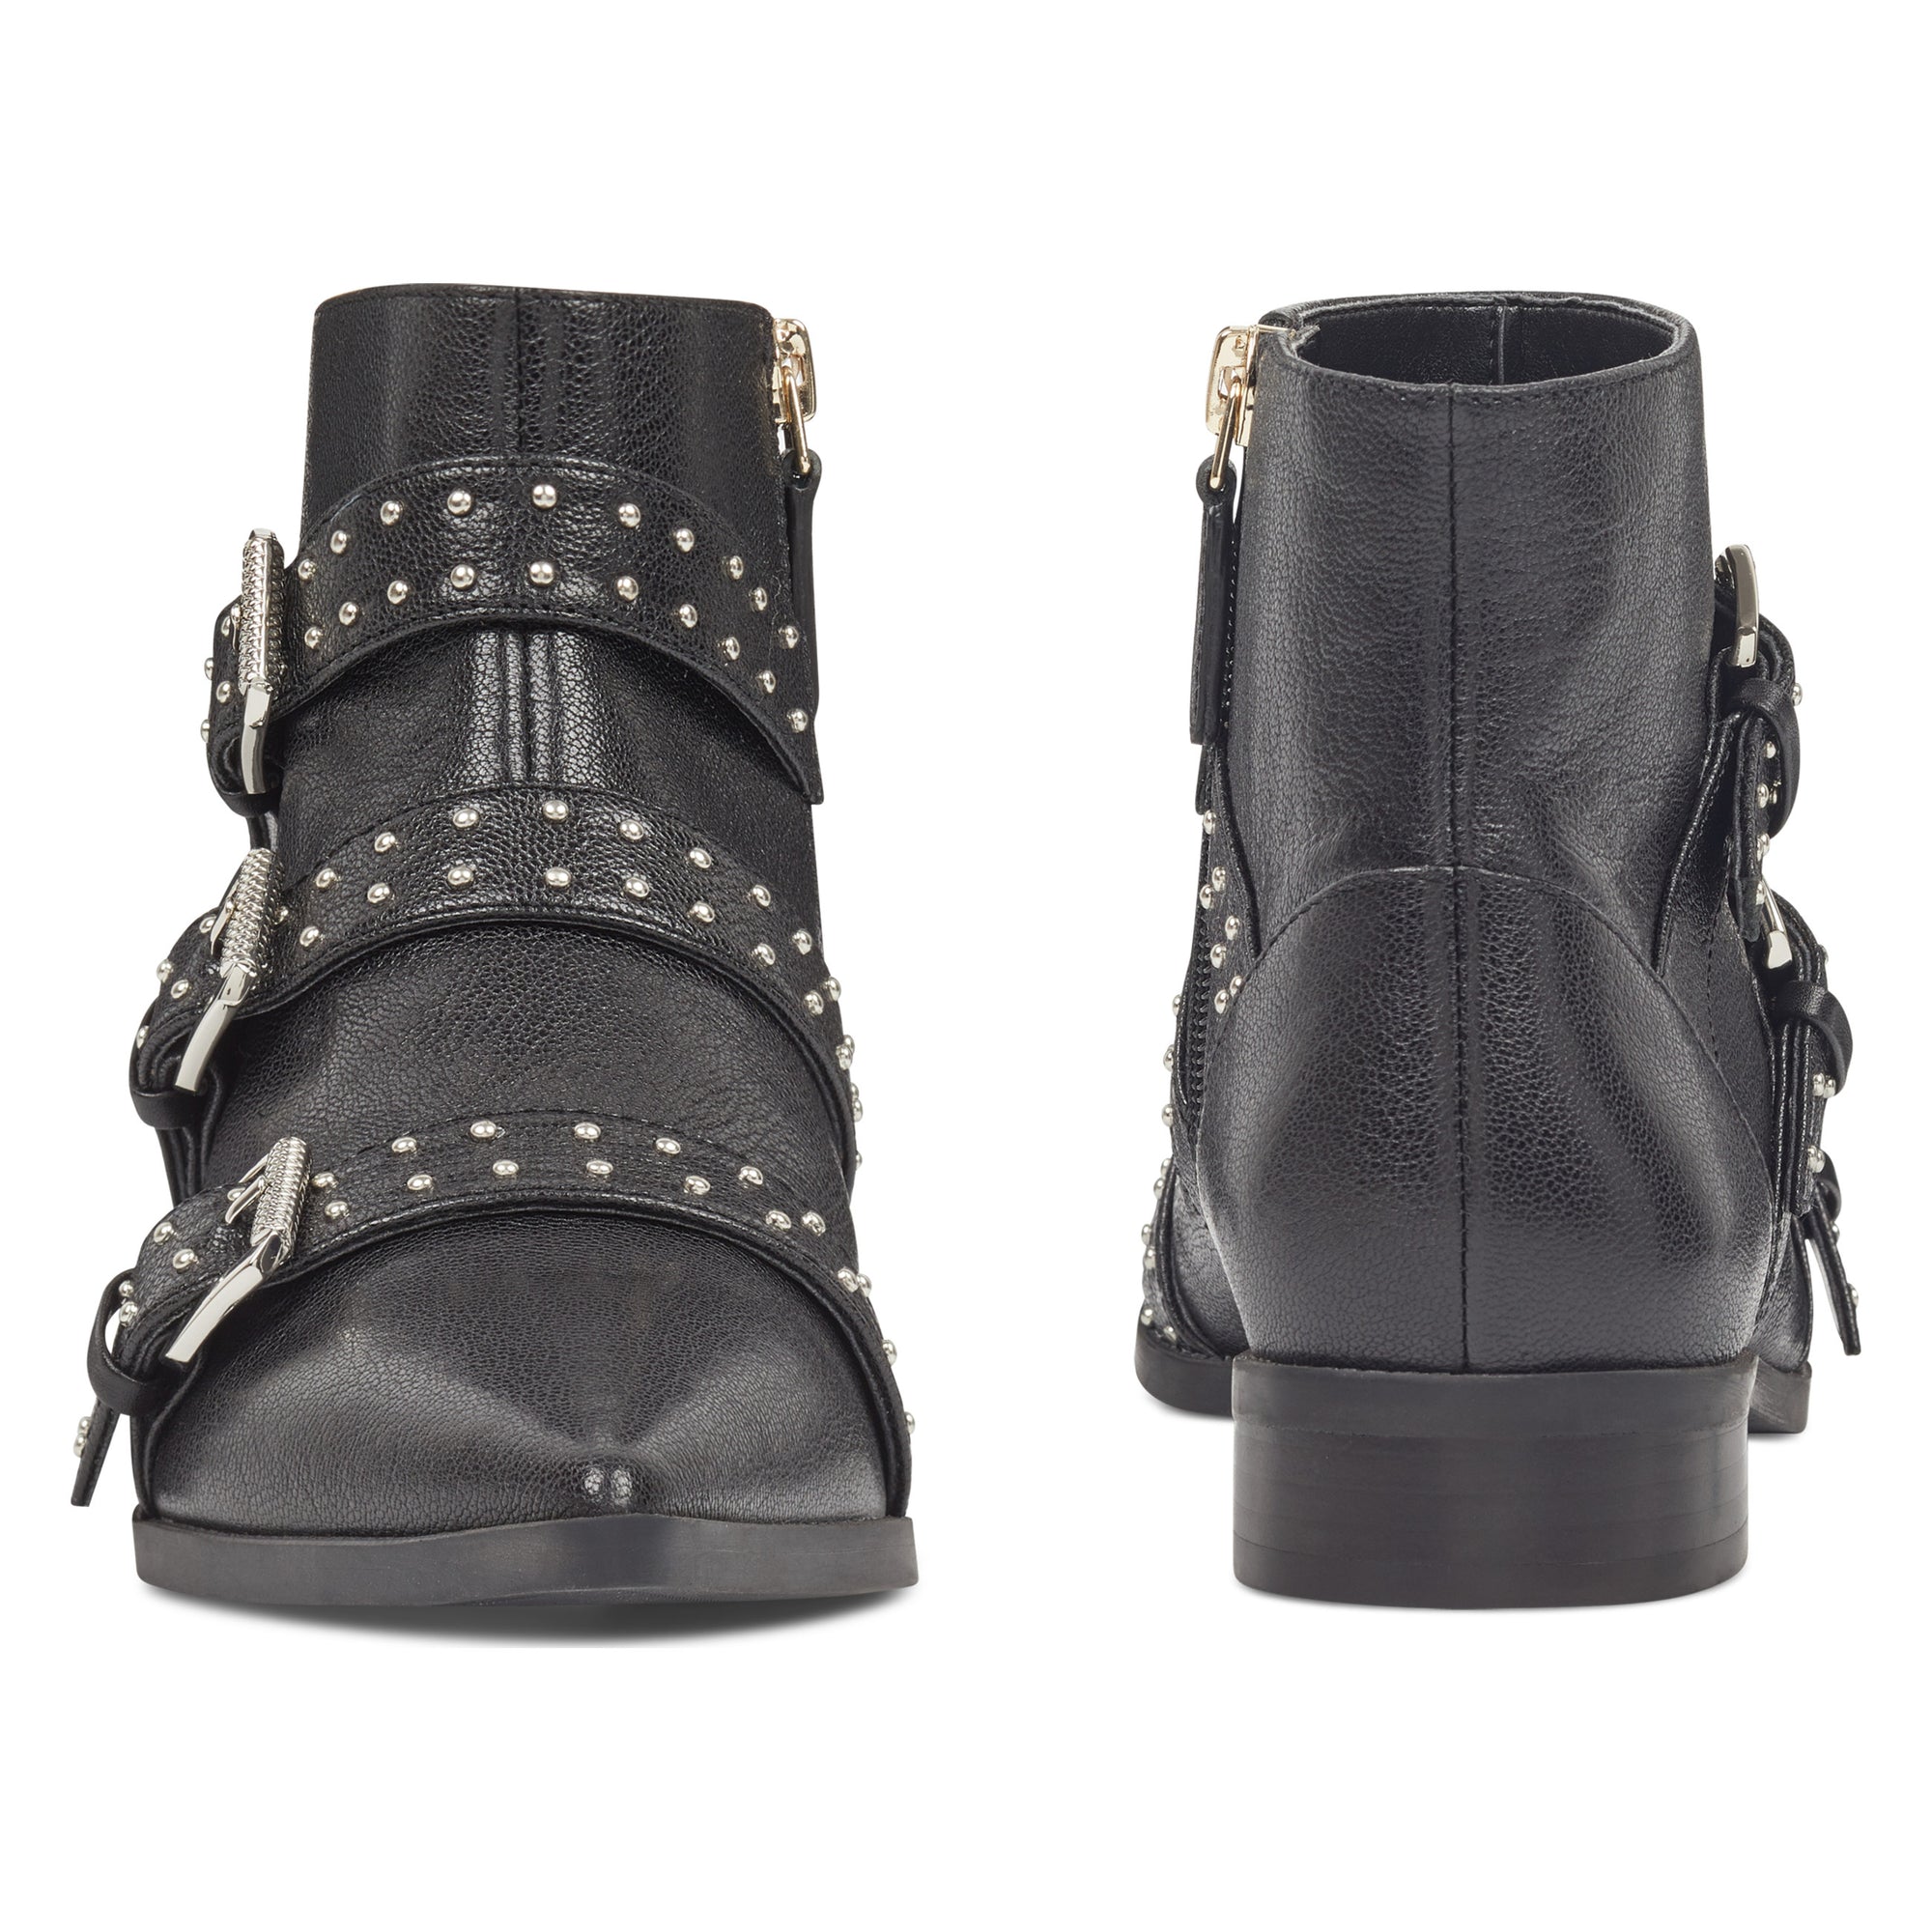 seraphim pointy toe booties